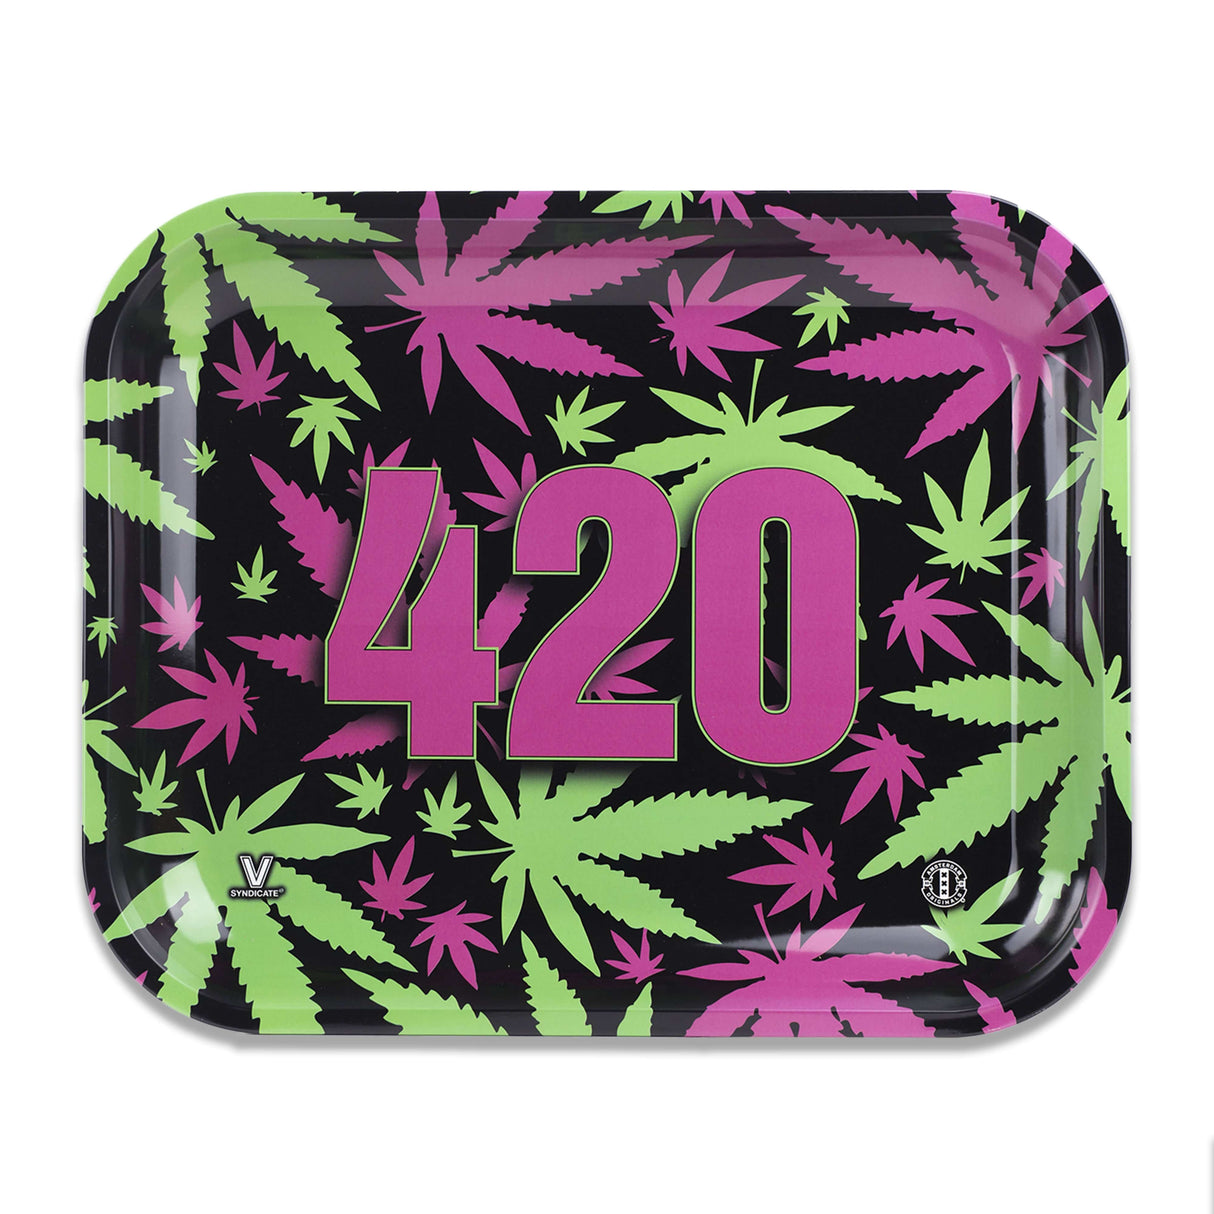 V Syndicate 420 Retro Metal Rollin' Tray with colorful cannabis leaf design, top view